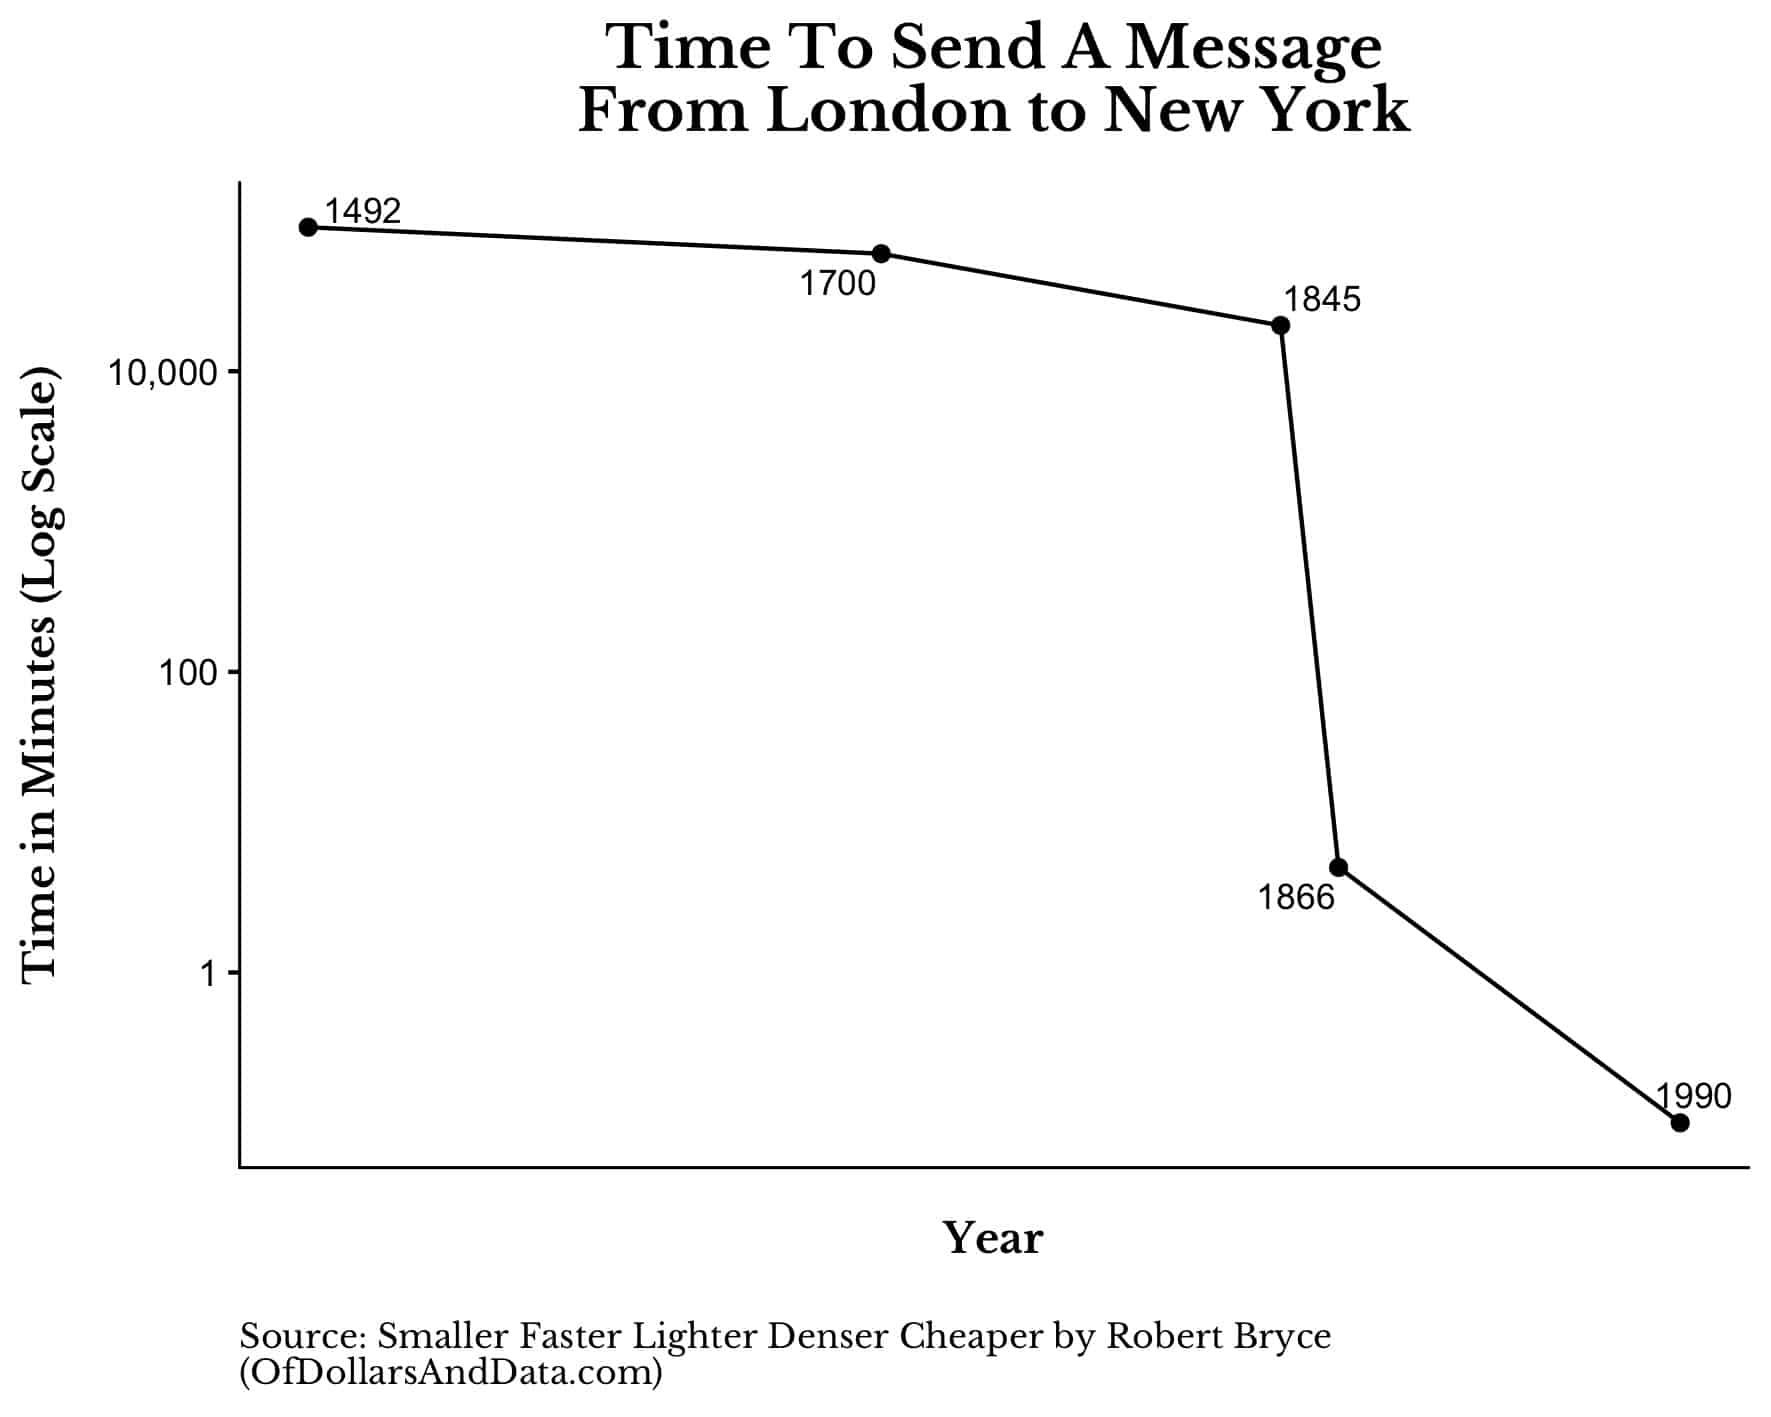 Chart of time to send a message from London to New York in minutes (log scale)